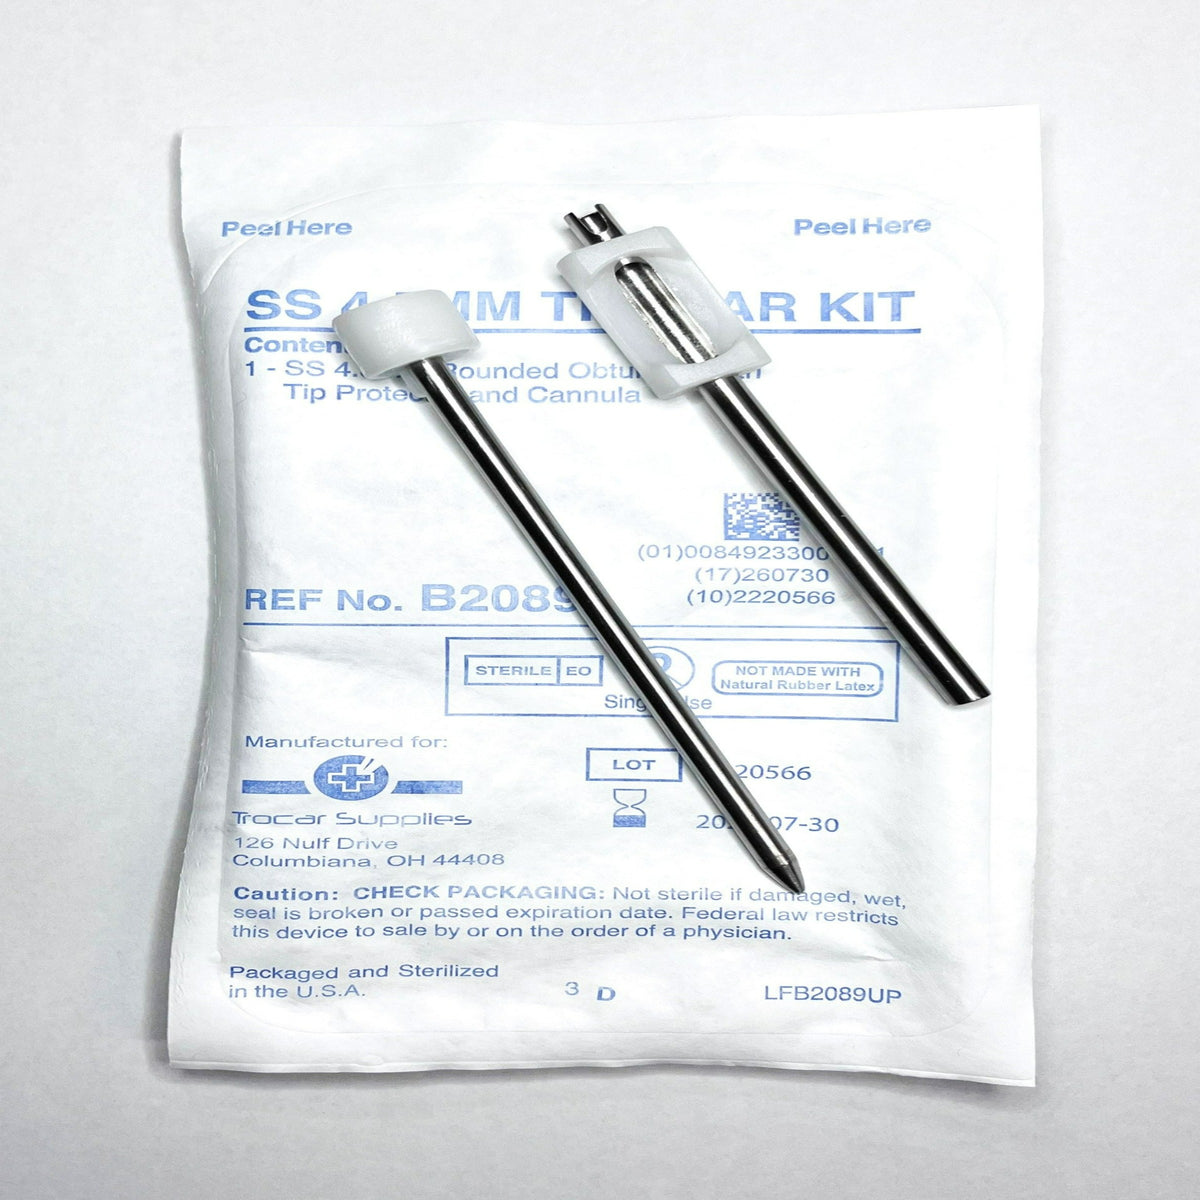 4.5mm Stainless Steel Disposable Atraumatic Blunt Tip Trocar Kit